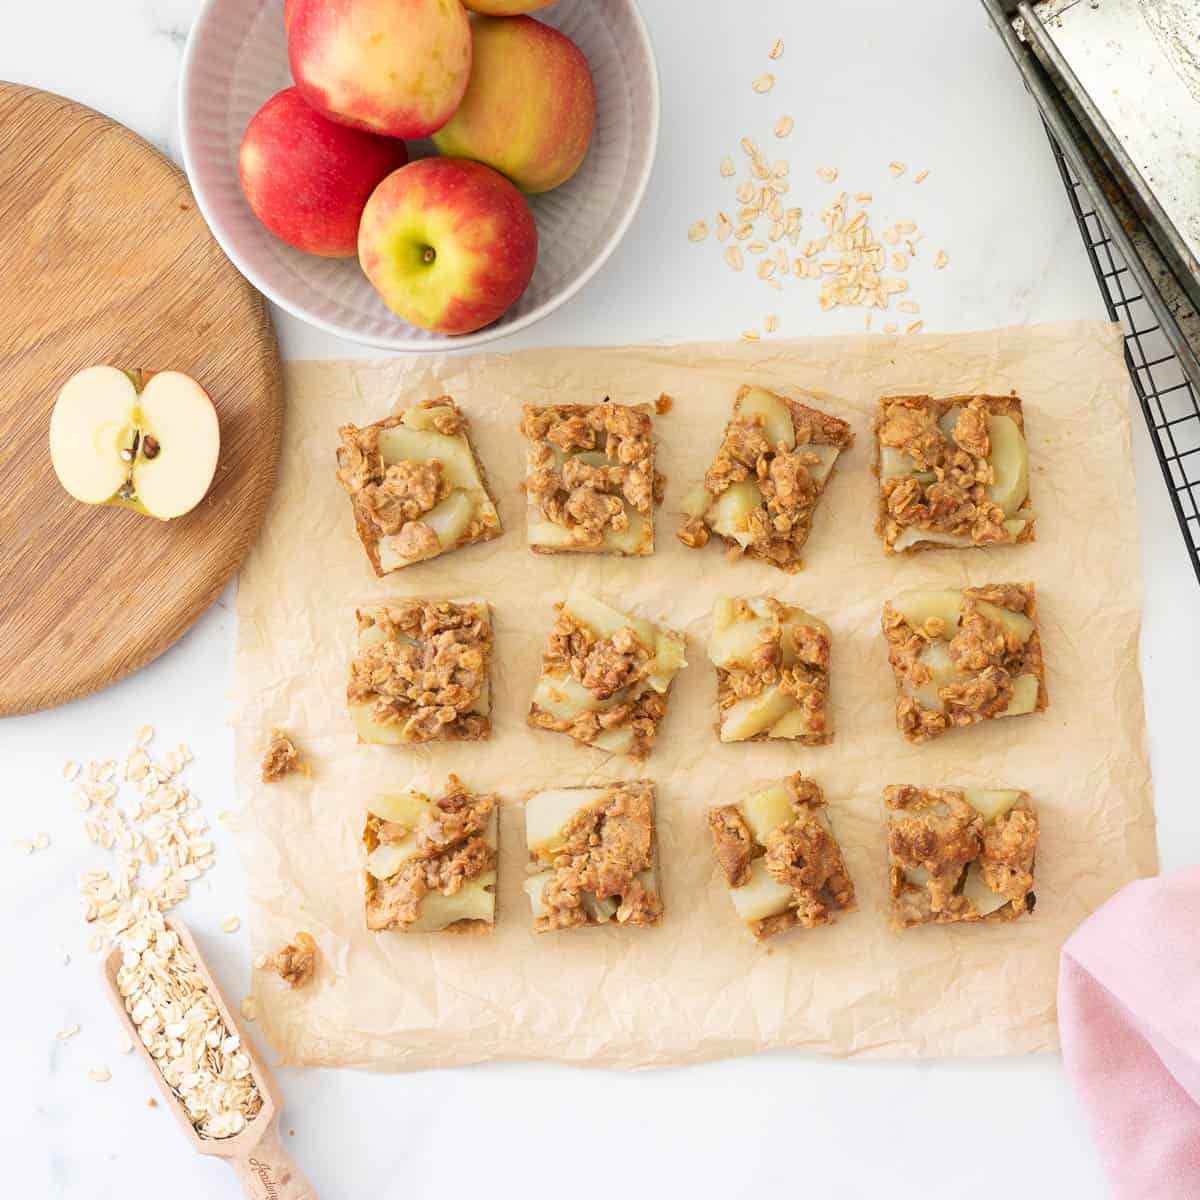 Twelve pices of apple slice on a sheet of brown parchment paper on a bench top scattered with rolled oats and apples.